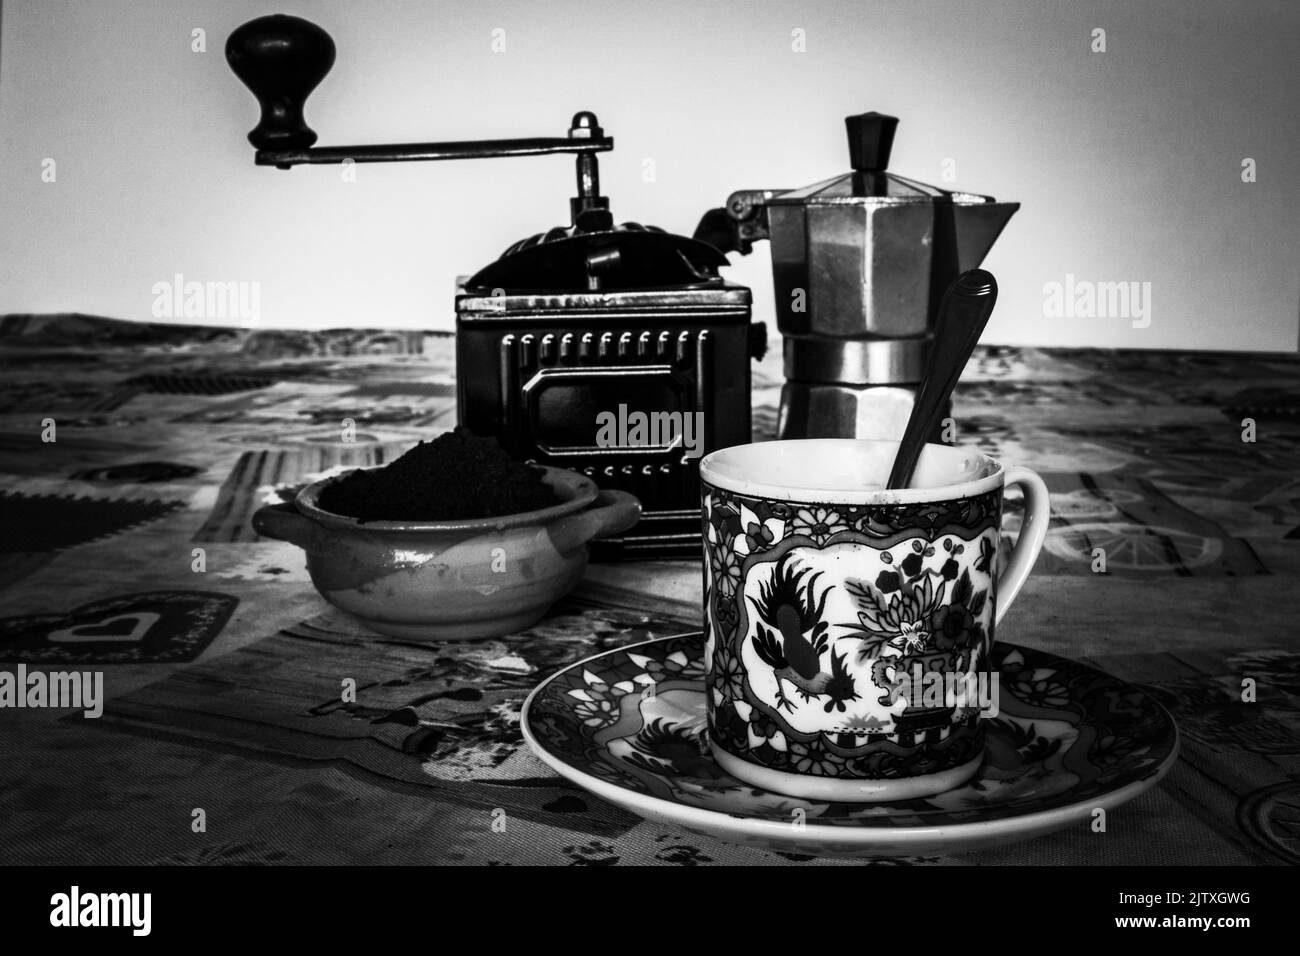 Image of a coffee cup, a coffee grinder and a mocha machine. Breakfast with an espresso.Vintage black and white photo Stock Photo